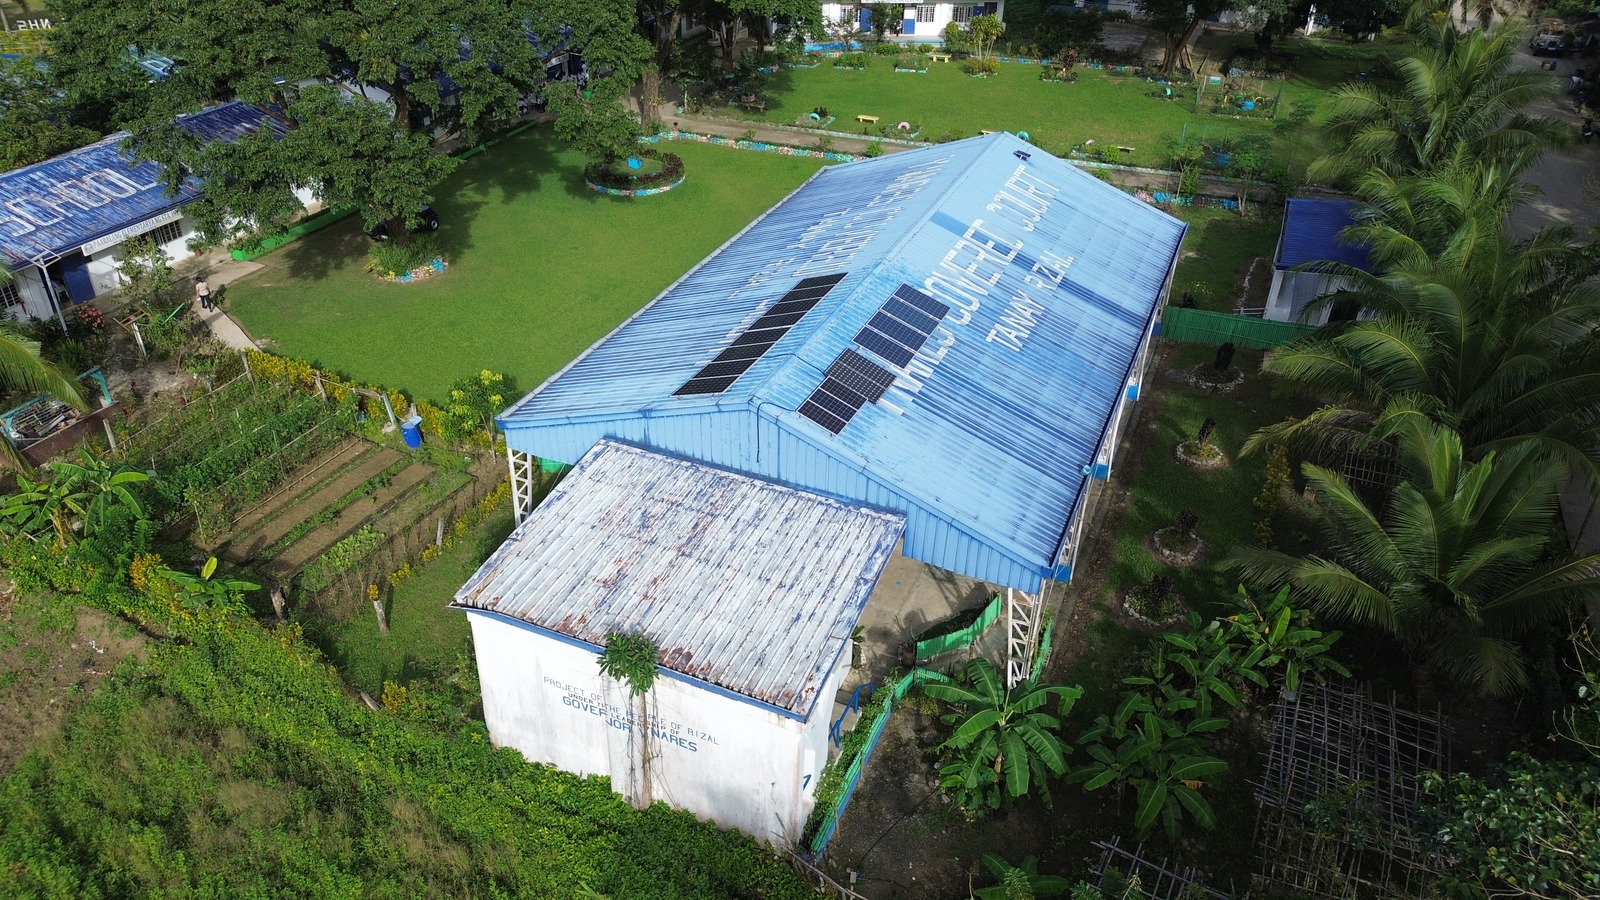 Installation of solar for school classrooms. Image Credit: Solar Hope.